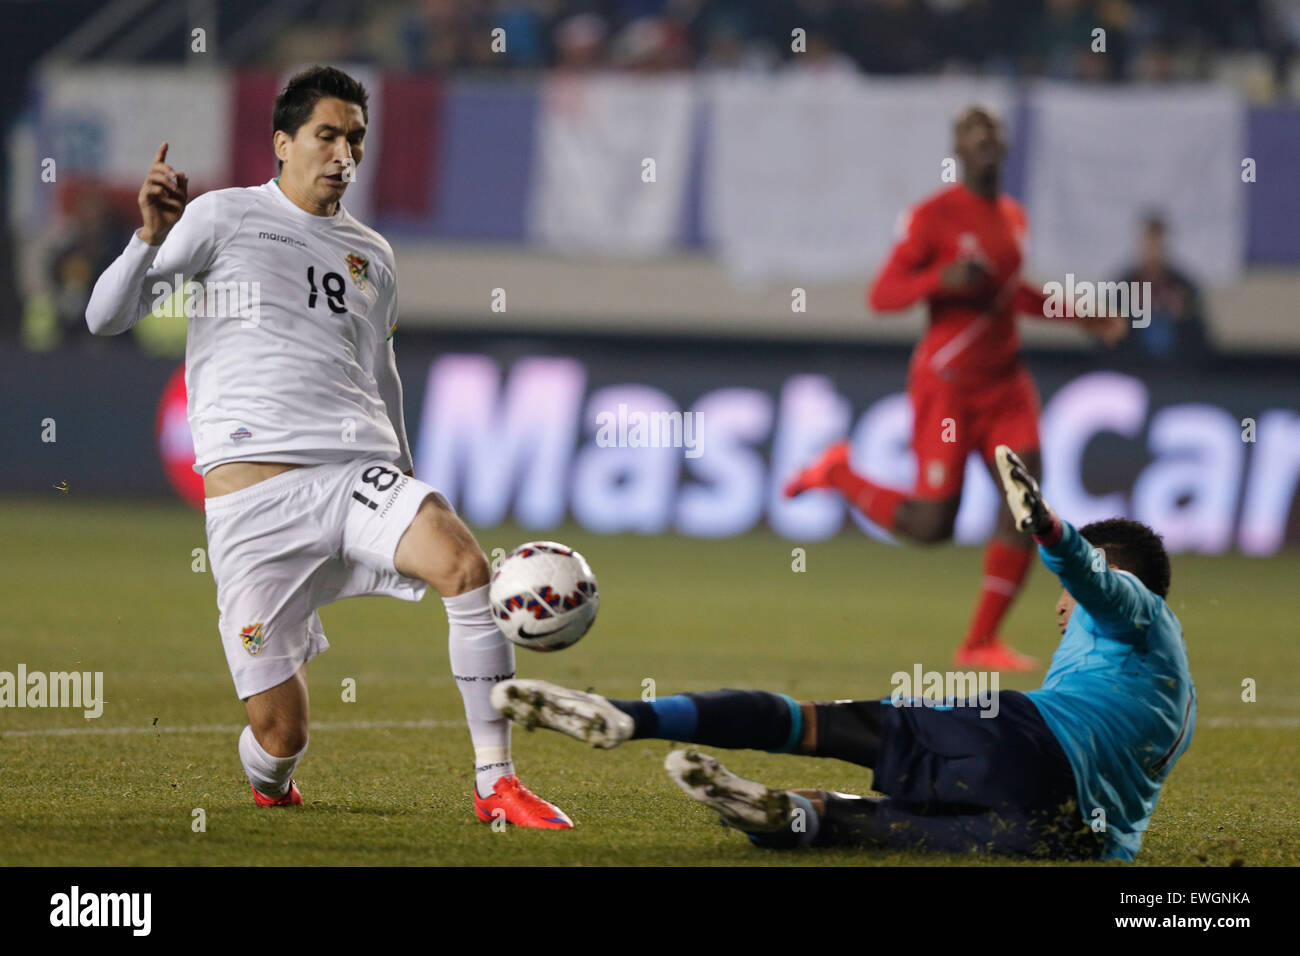 Temuco, Chile. 25th June, 2015. Ricardo Pedriel (L) of Bolivia vies with Pedro Gallese of Peru during their quarterfinal match at 2015 Copa America Chile in Temuco, Chile, on June 25, 2015. Peru beat Bolivia 3-1. Credit:  Guillermo Arias/Xinhua/Alamy Live News Stock Photo